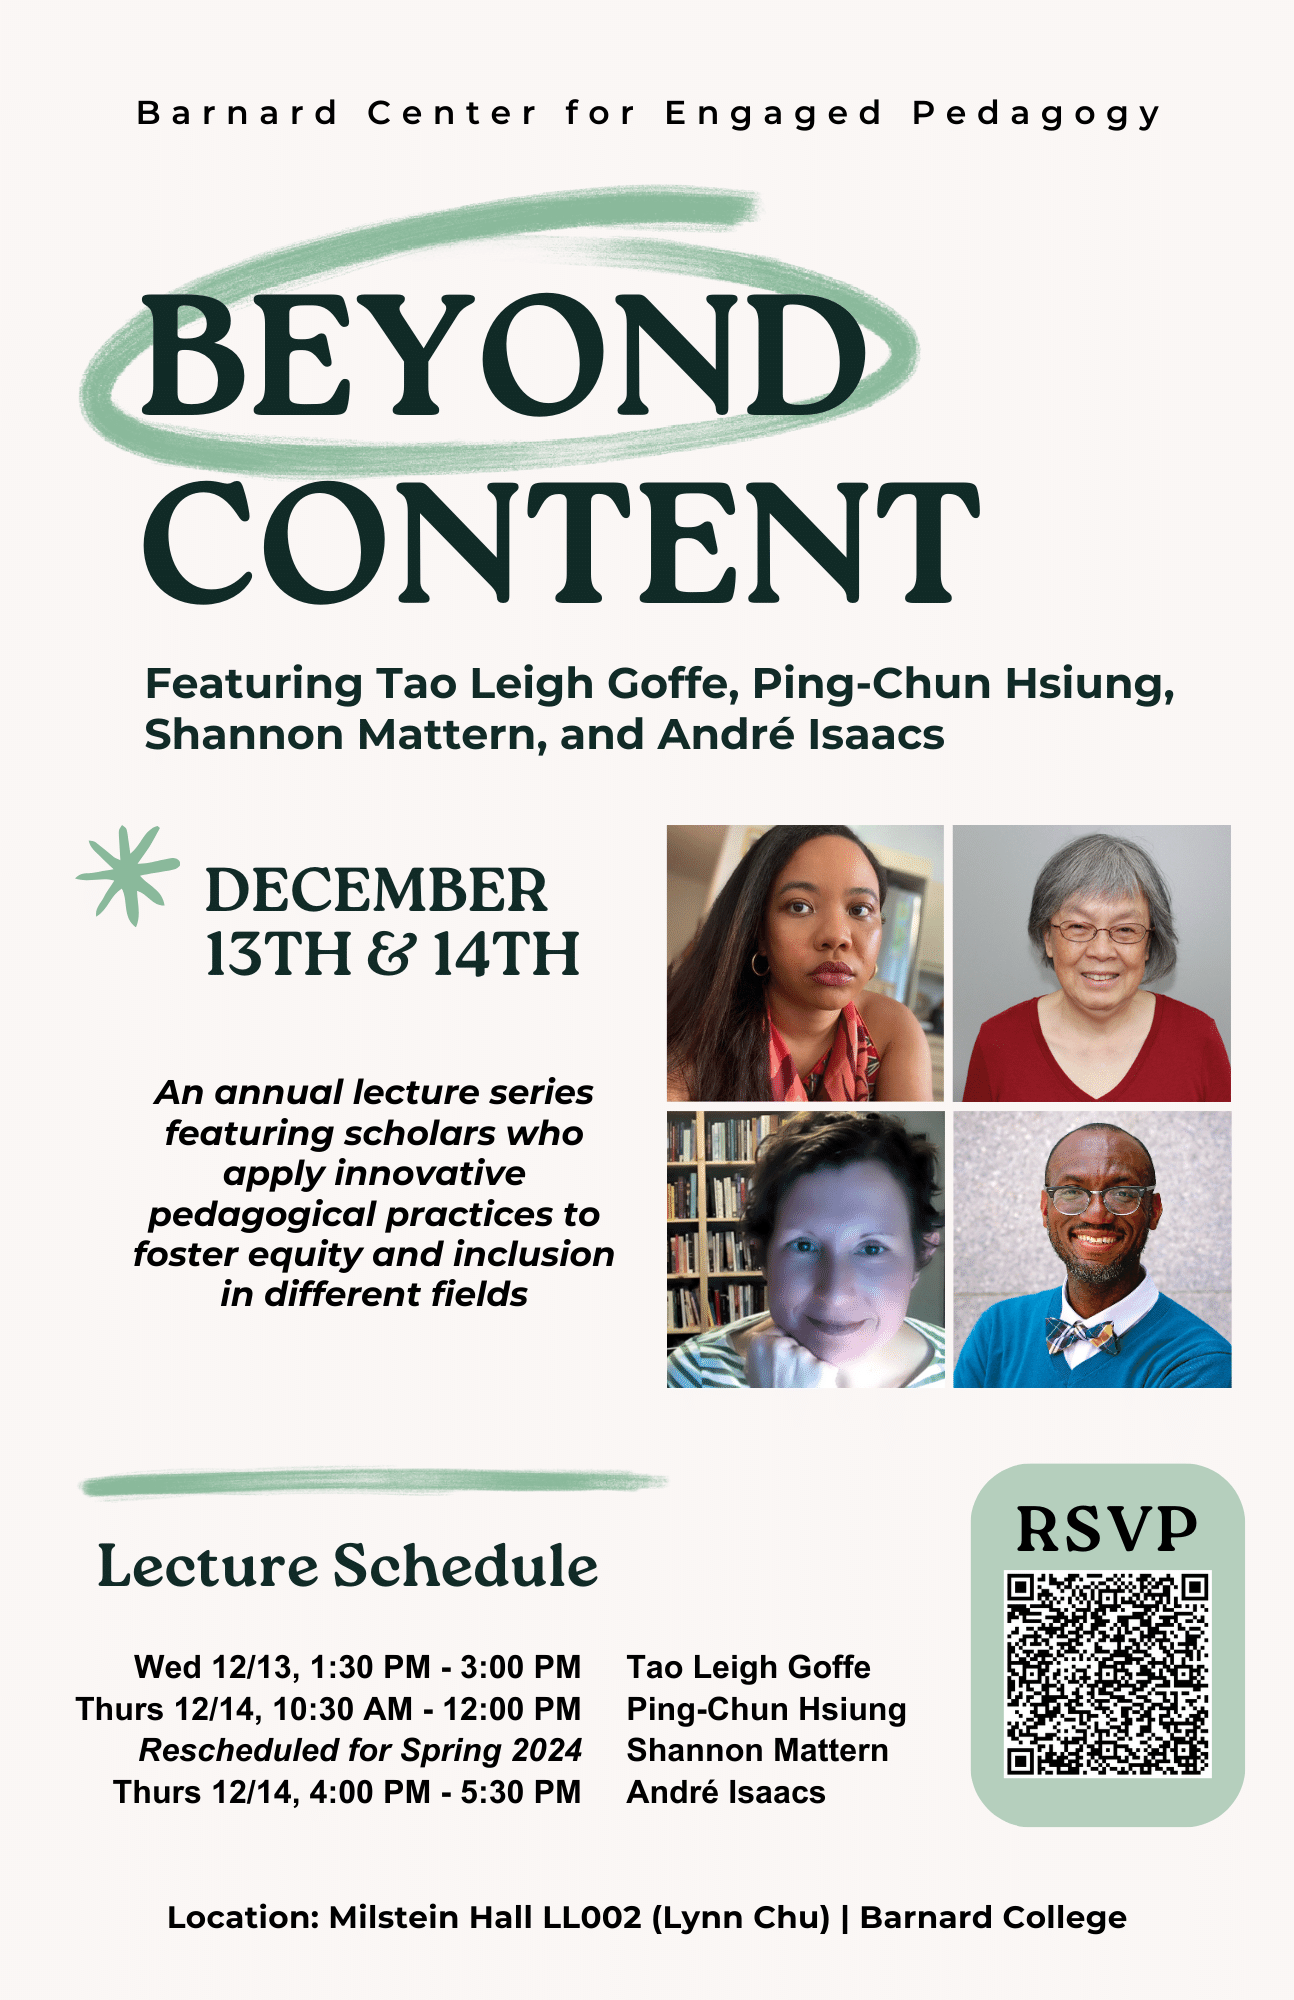 A graphic reading "Beyond Content" with the photos of four speakers and event details. 